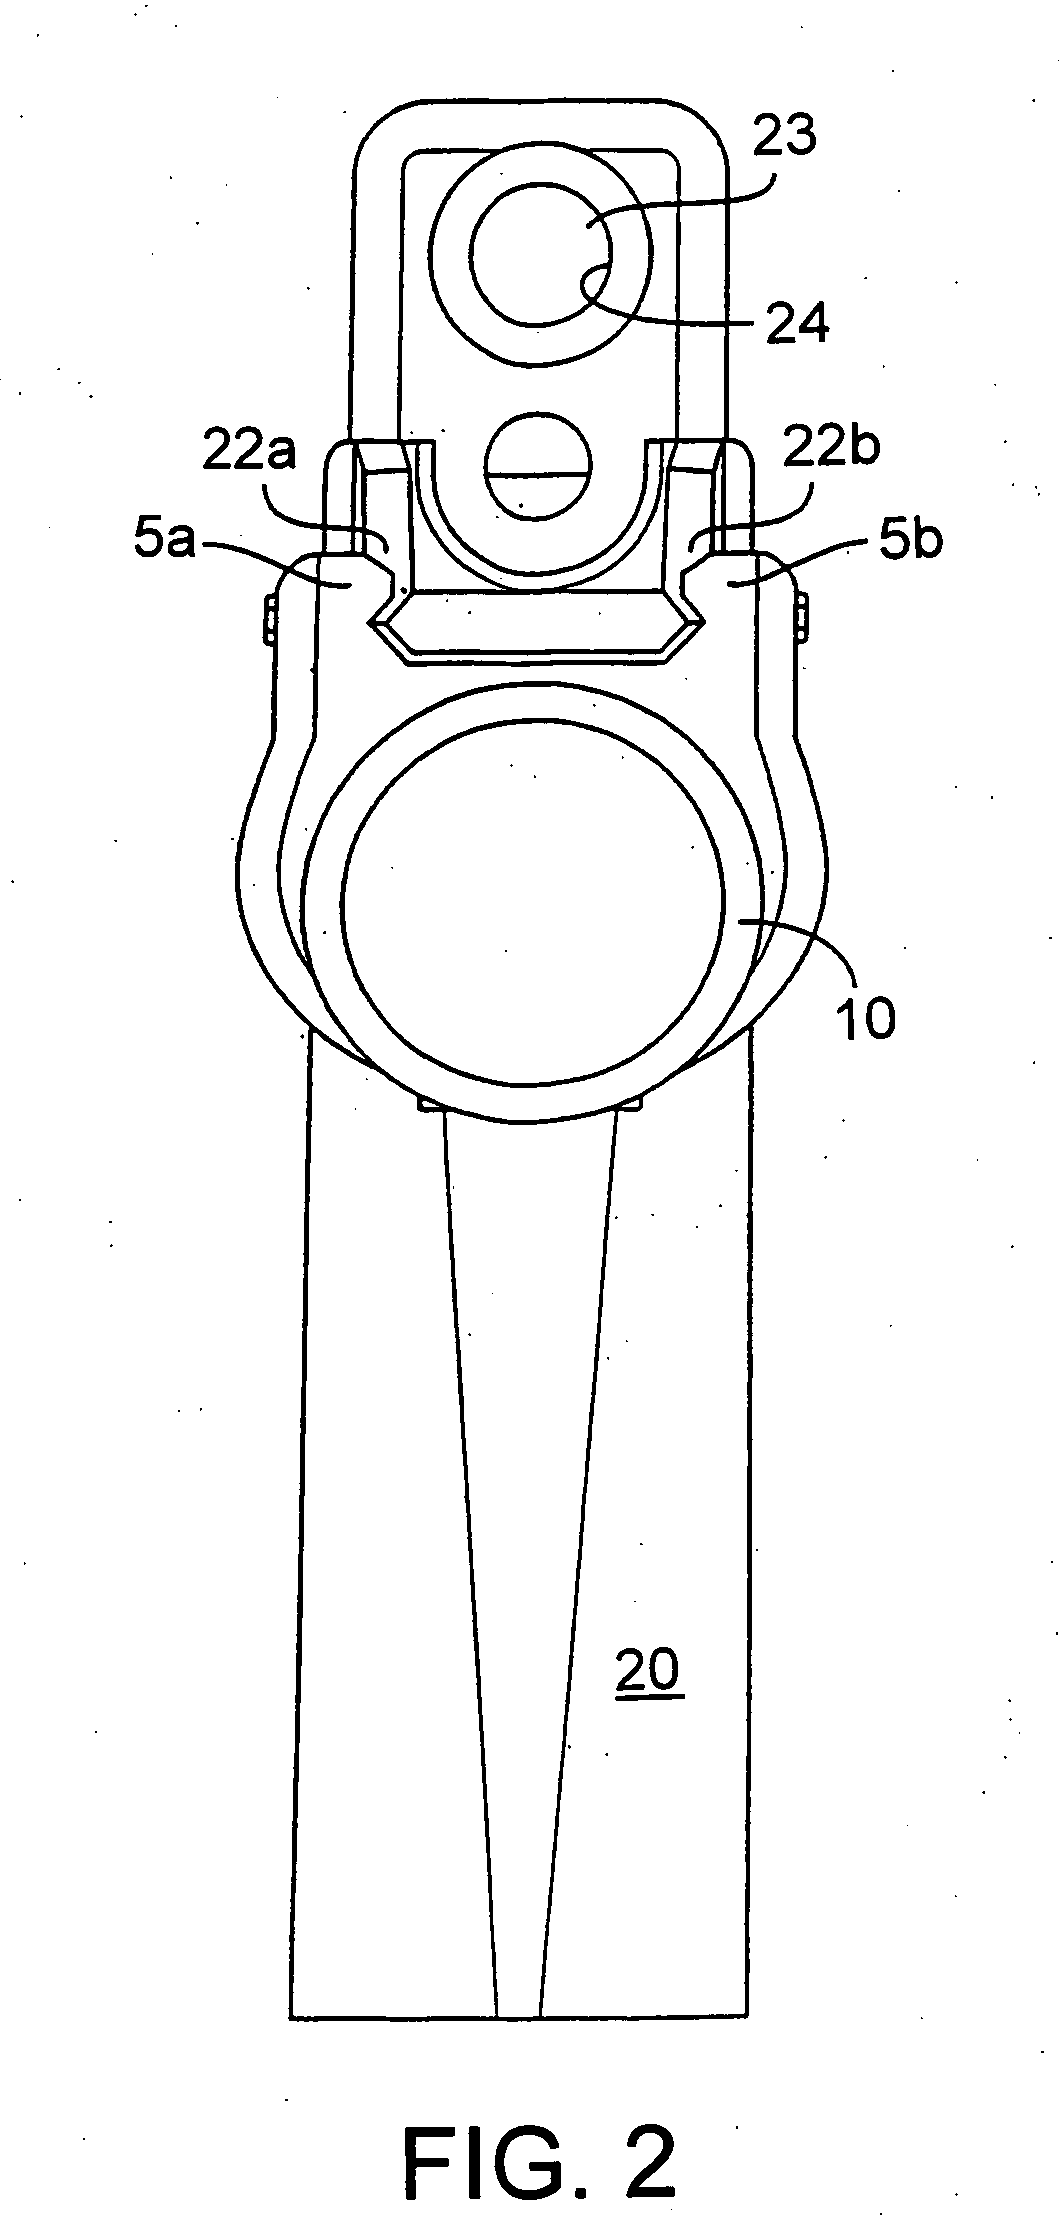 Auxiliary device for a weapon and attachment thereof